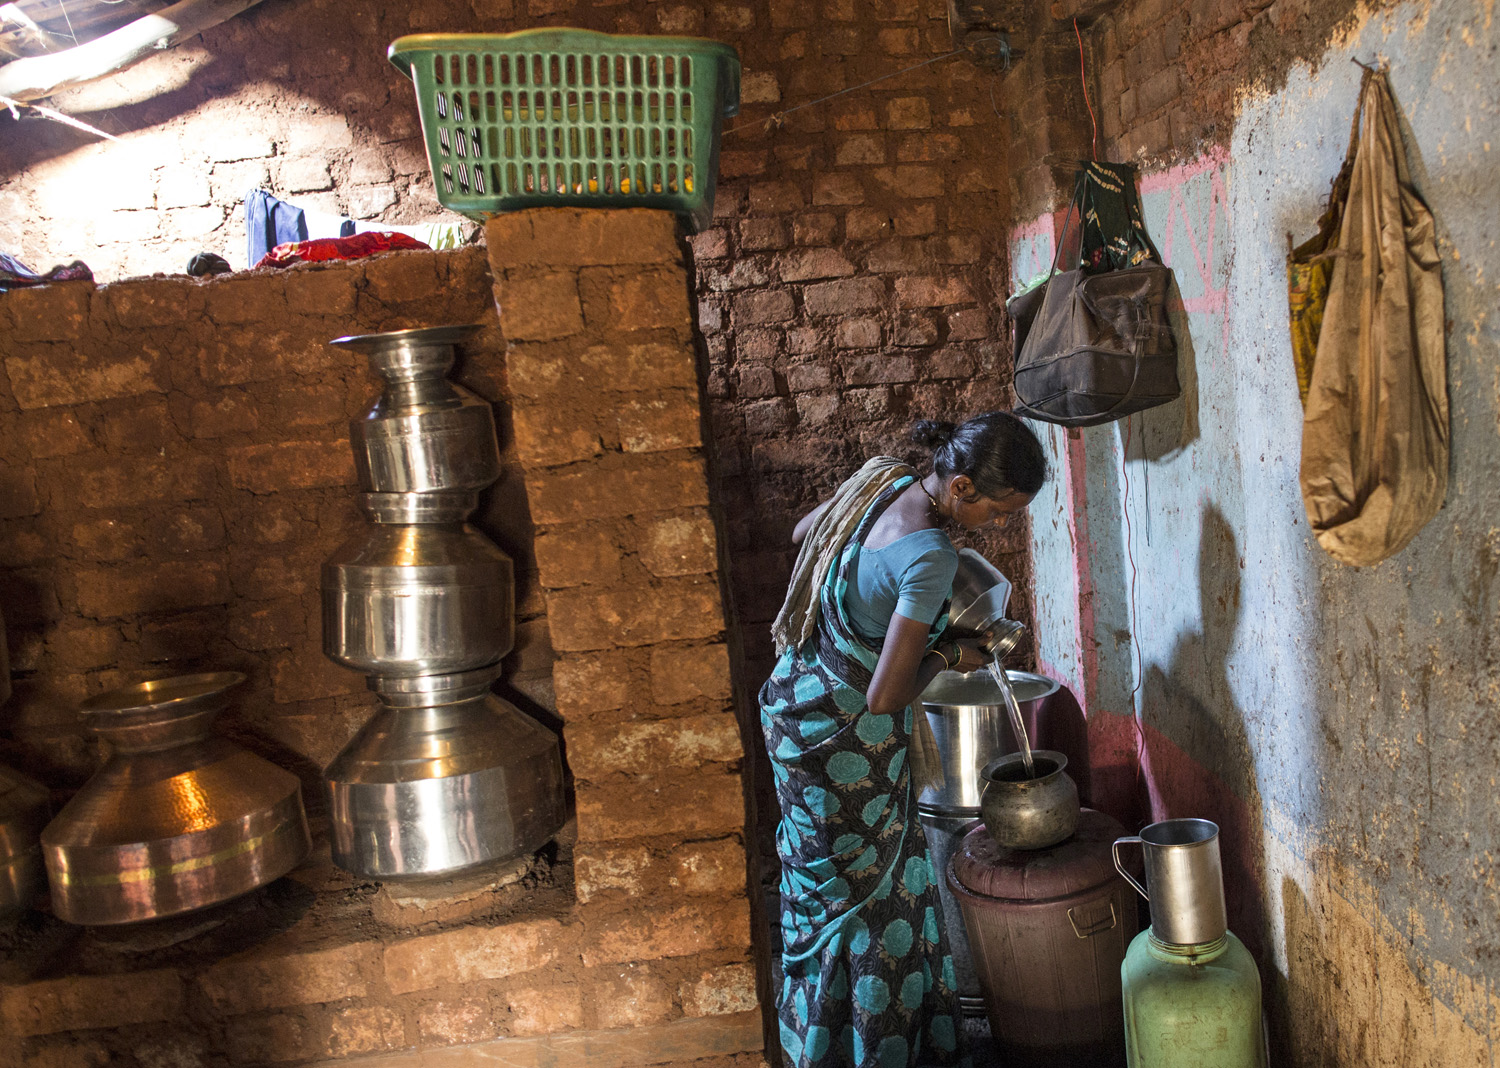  Shivarti, second wife of Namdeo, empties a water pitcher as she gets ready to fill water from a well outside Denganmal village. 